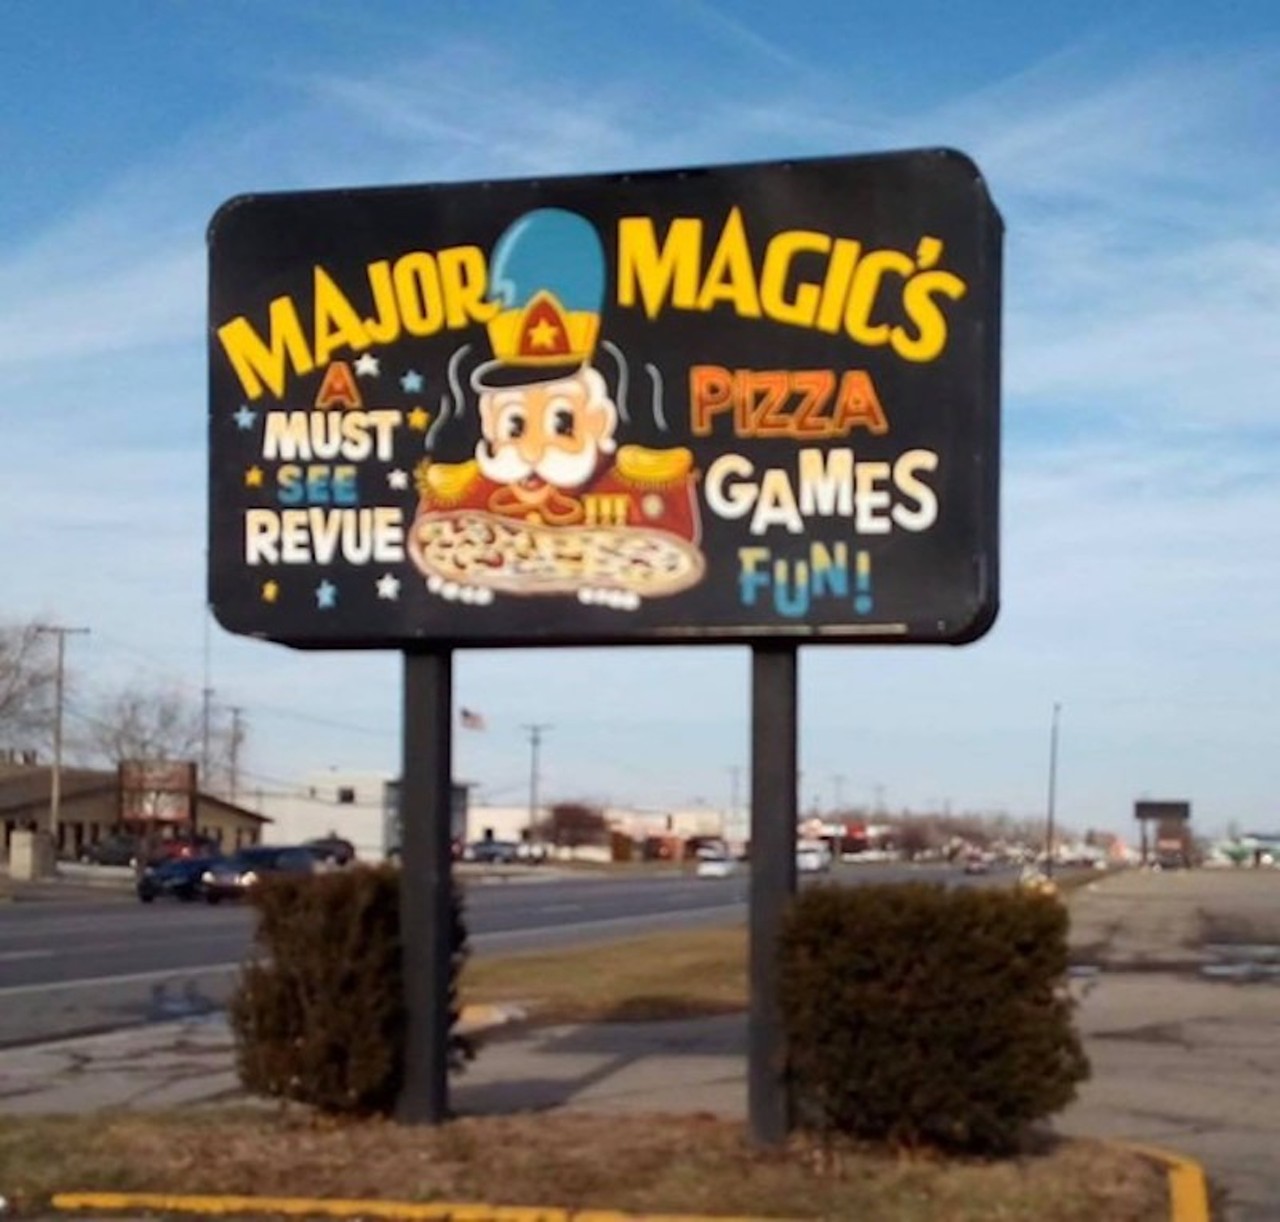 Major Magic&#146;s All-Star Pizza Revue
34770 Groesbeck Hwy., Clinton Twp 
Major Magic and the Rock n' Roll Rebellion are no more. Of course, we're referring to the choppy animatronic band and namesake of Major Magic's, the beloved family-focused midwest pizza and entertainment chain. In February, after the years-long restoration of the animatronic band members and original games, Major Magic's re-opened its doors, marking the kitschy pizza arcade's return to southeast Michigan, not too far from its last Michigan location on Gratiot Avenue, which opened in 1982 and shuttered in the early 2000s. The permanent closure came in November after new statewide restrictions were enforced. Owners took to Facebook to announce not only the pizza arcade&#146;s closure but that they would be selling off the games and robotics during an open house. 
Photo via Spark&#146;s Pinball Museum and Arcade/Facebook